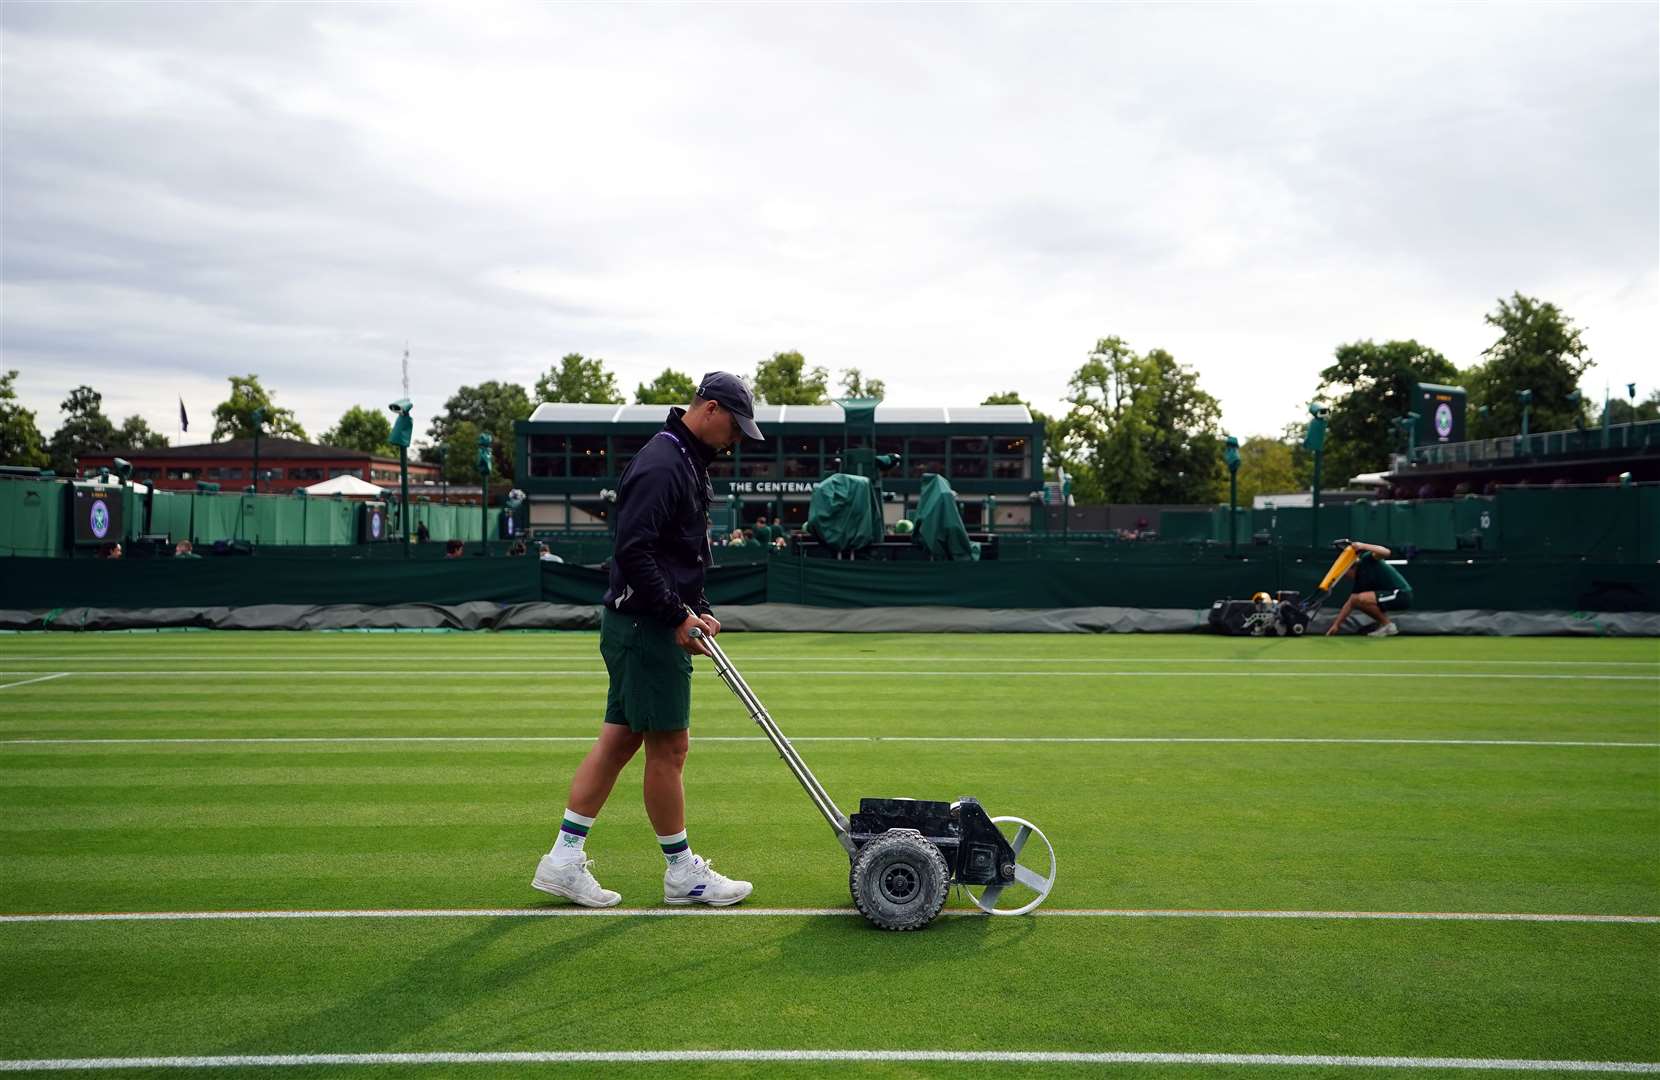 Ground staff prepare the courts on day two of the 2023 Wimbledon Championships (Zac Goodwin/PA)